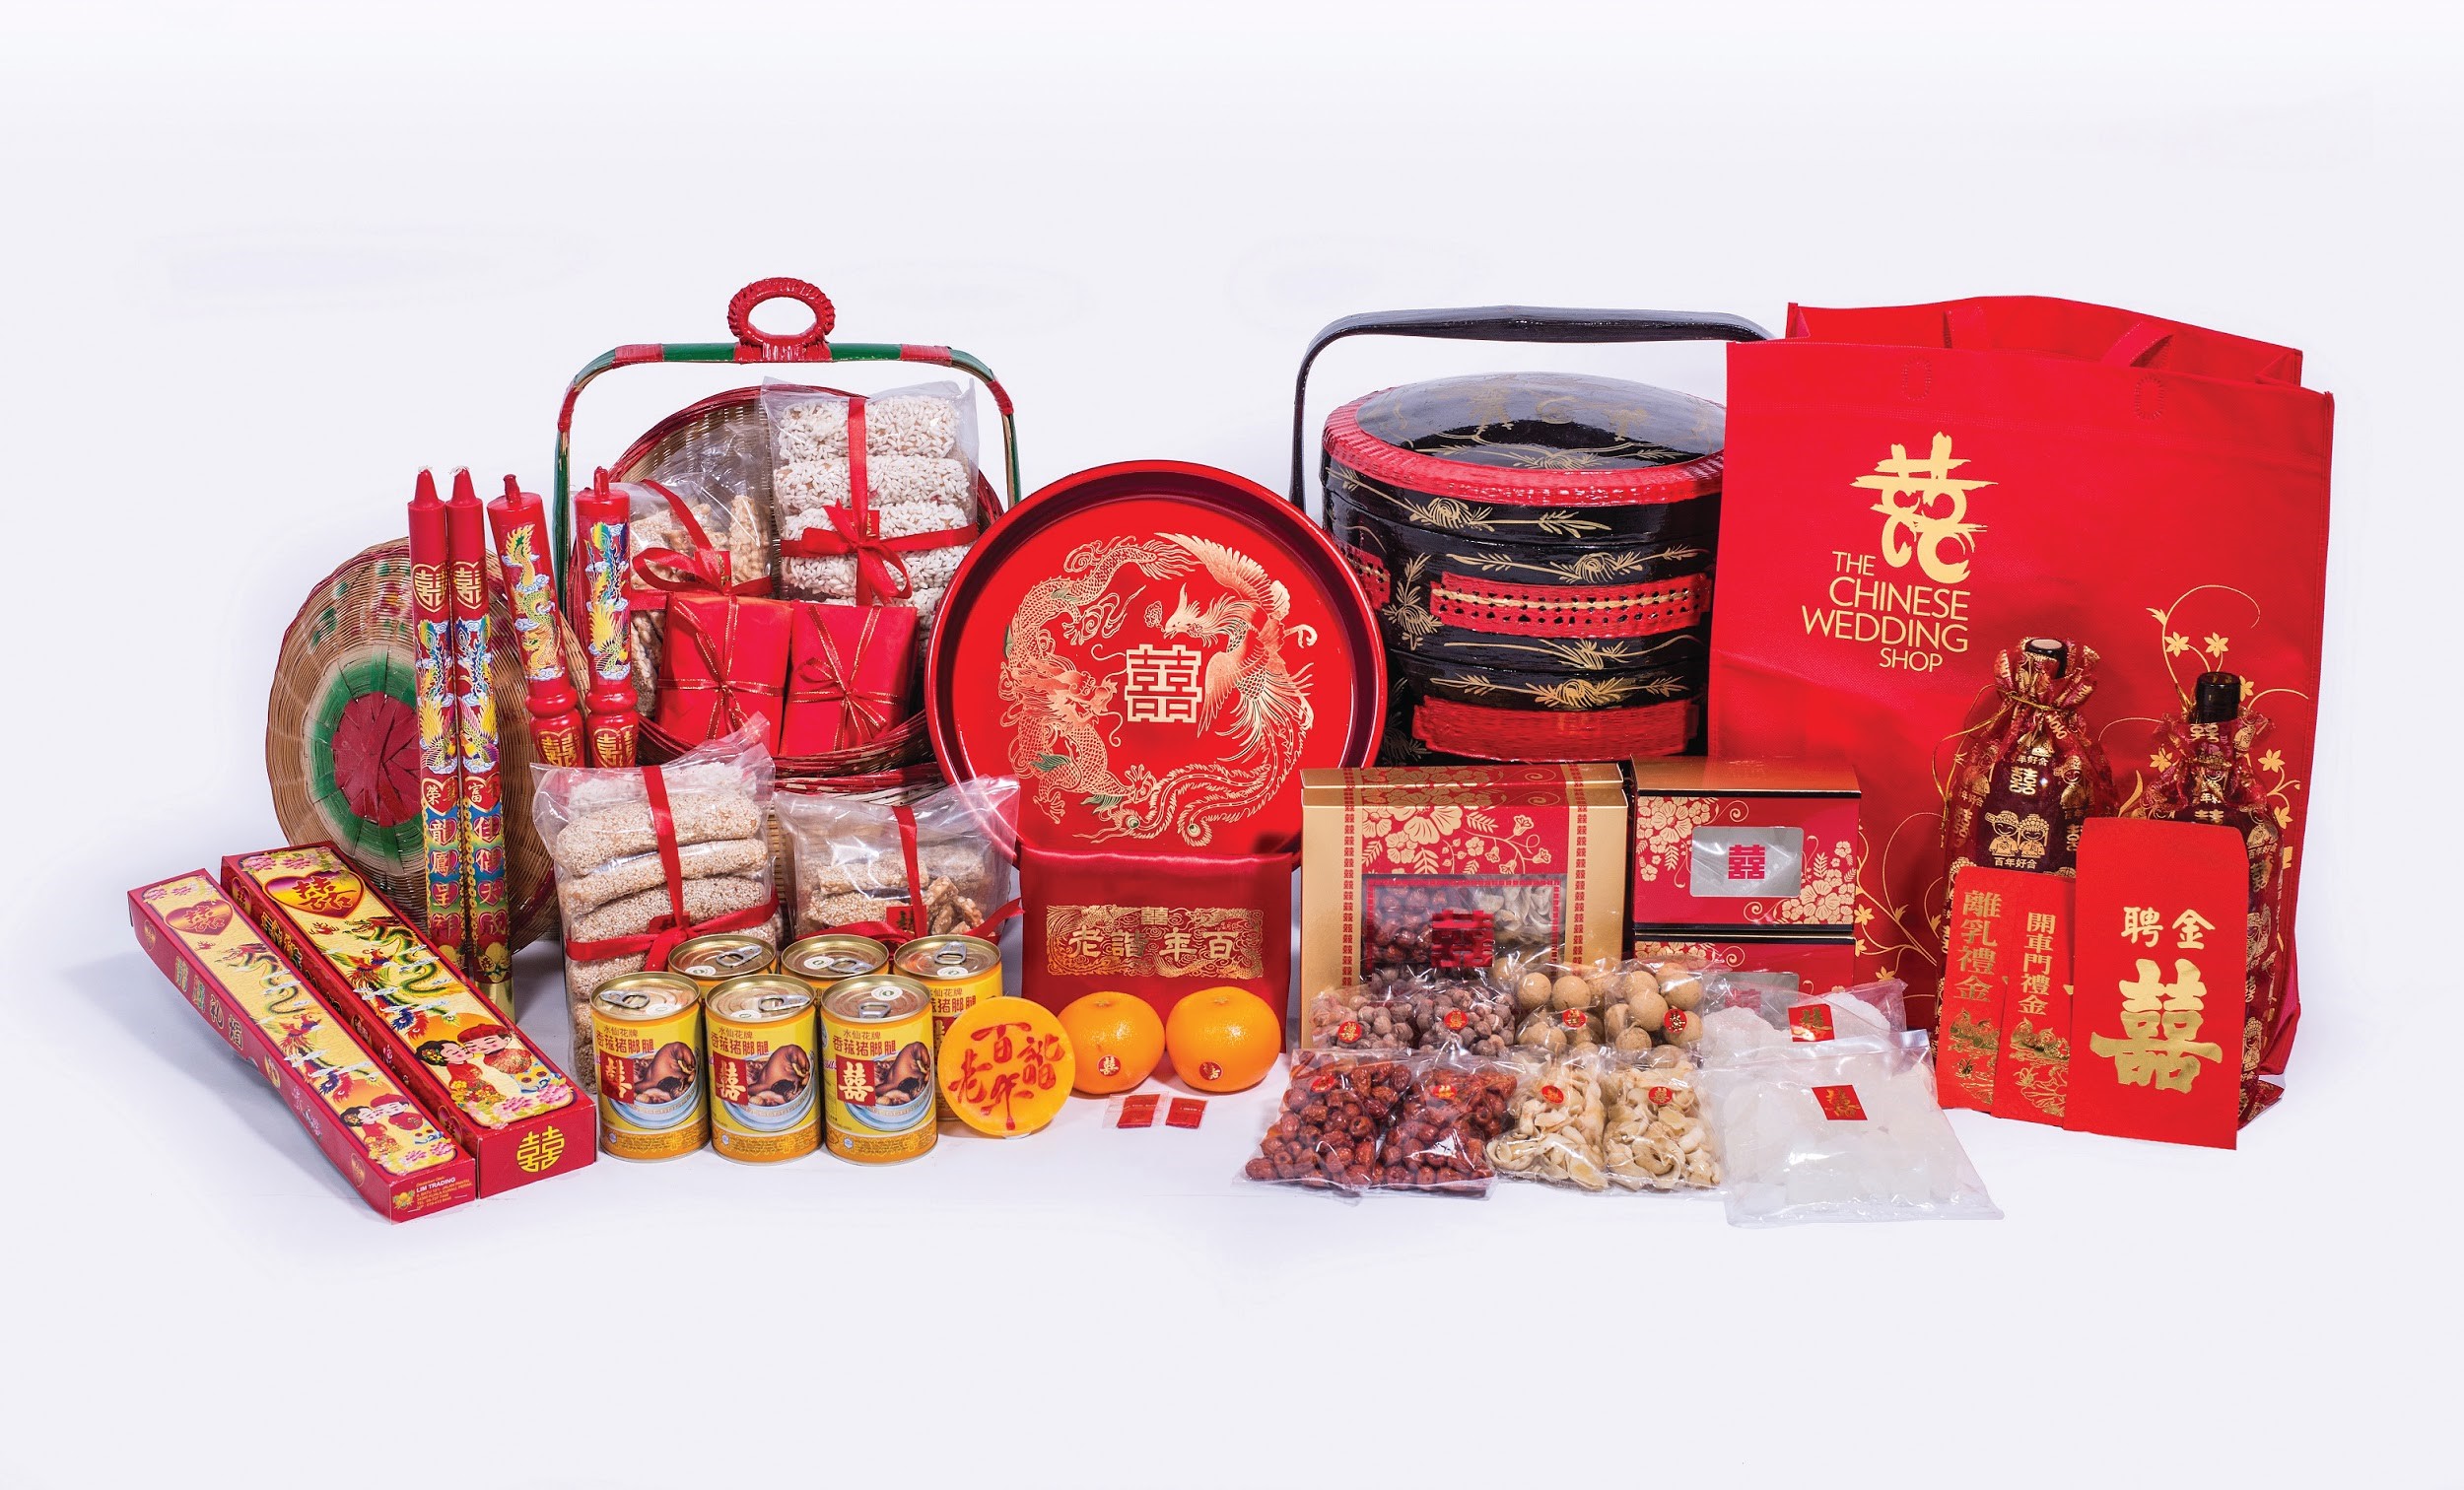 The Love of Traditions | The Chinese Wedding Shop